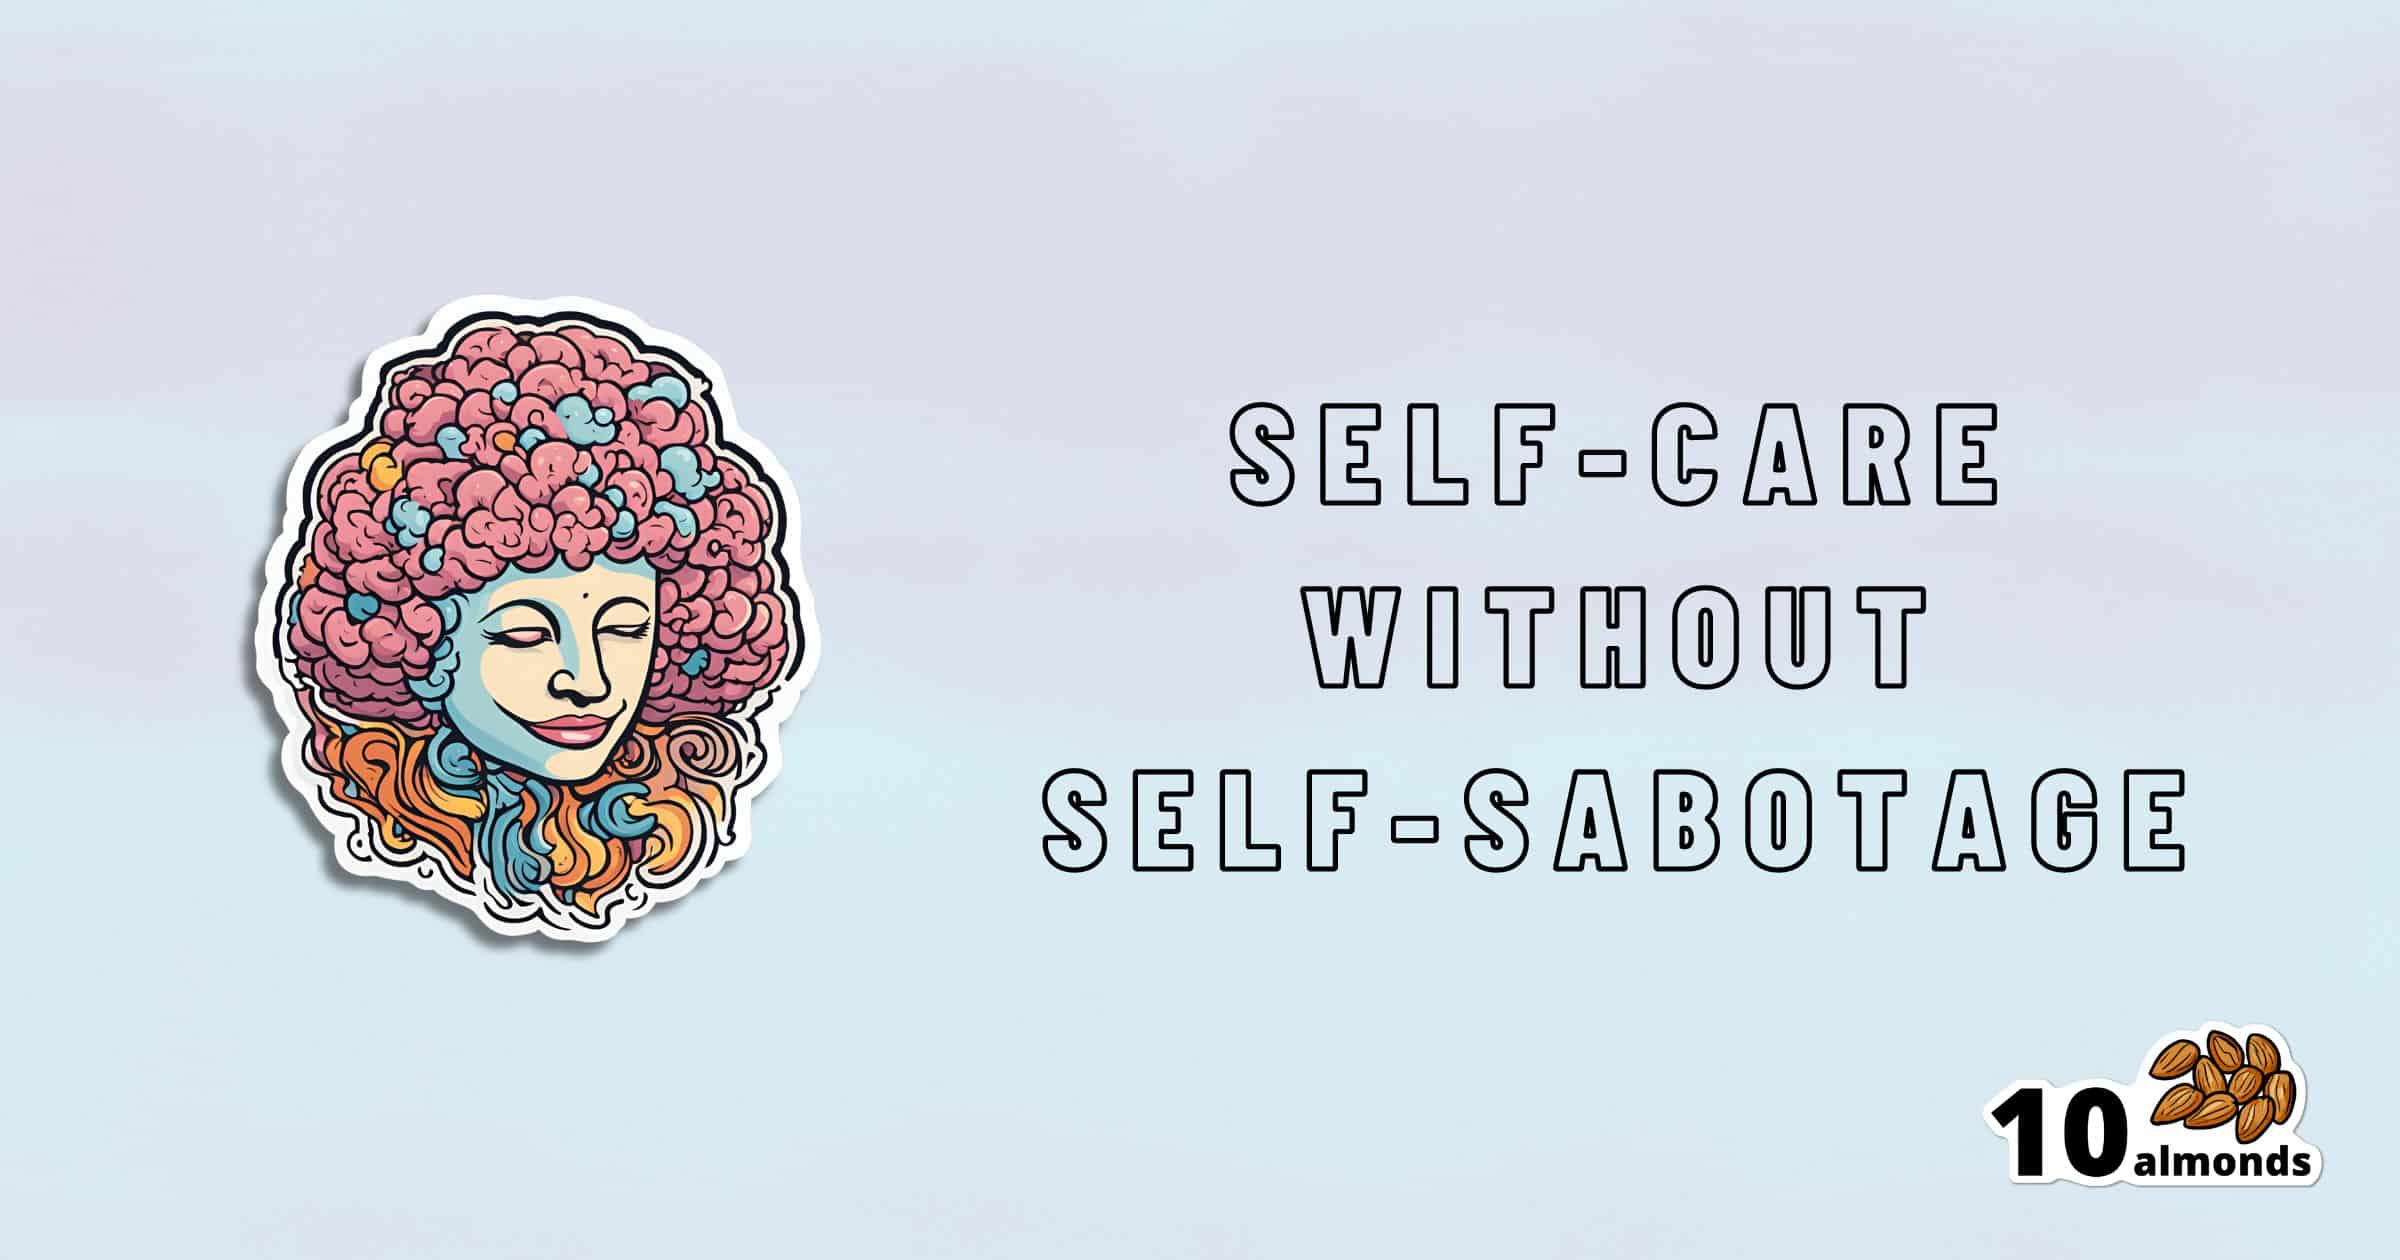 An illustrated face with colorful curly hair on the left, and the text "SELF-CARE WITHOUT SELF-SABOTAGE" on the right. In the bottom right corner, there is a logo with the text "10 almonds" and an image of almonds. The light blue background suggests ways to Self-soothe without food.